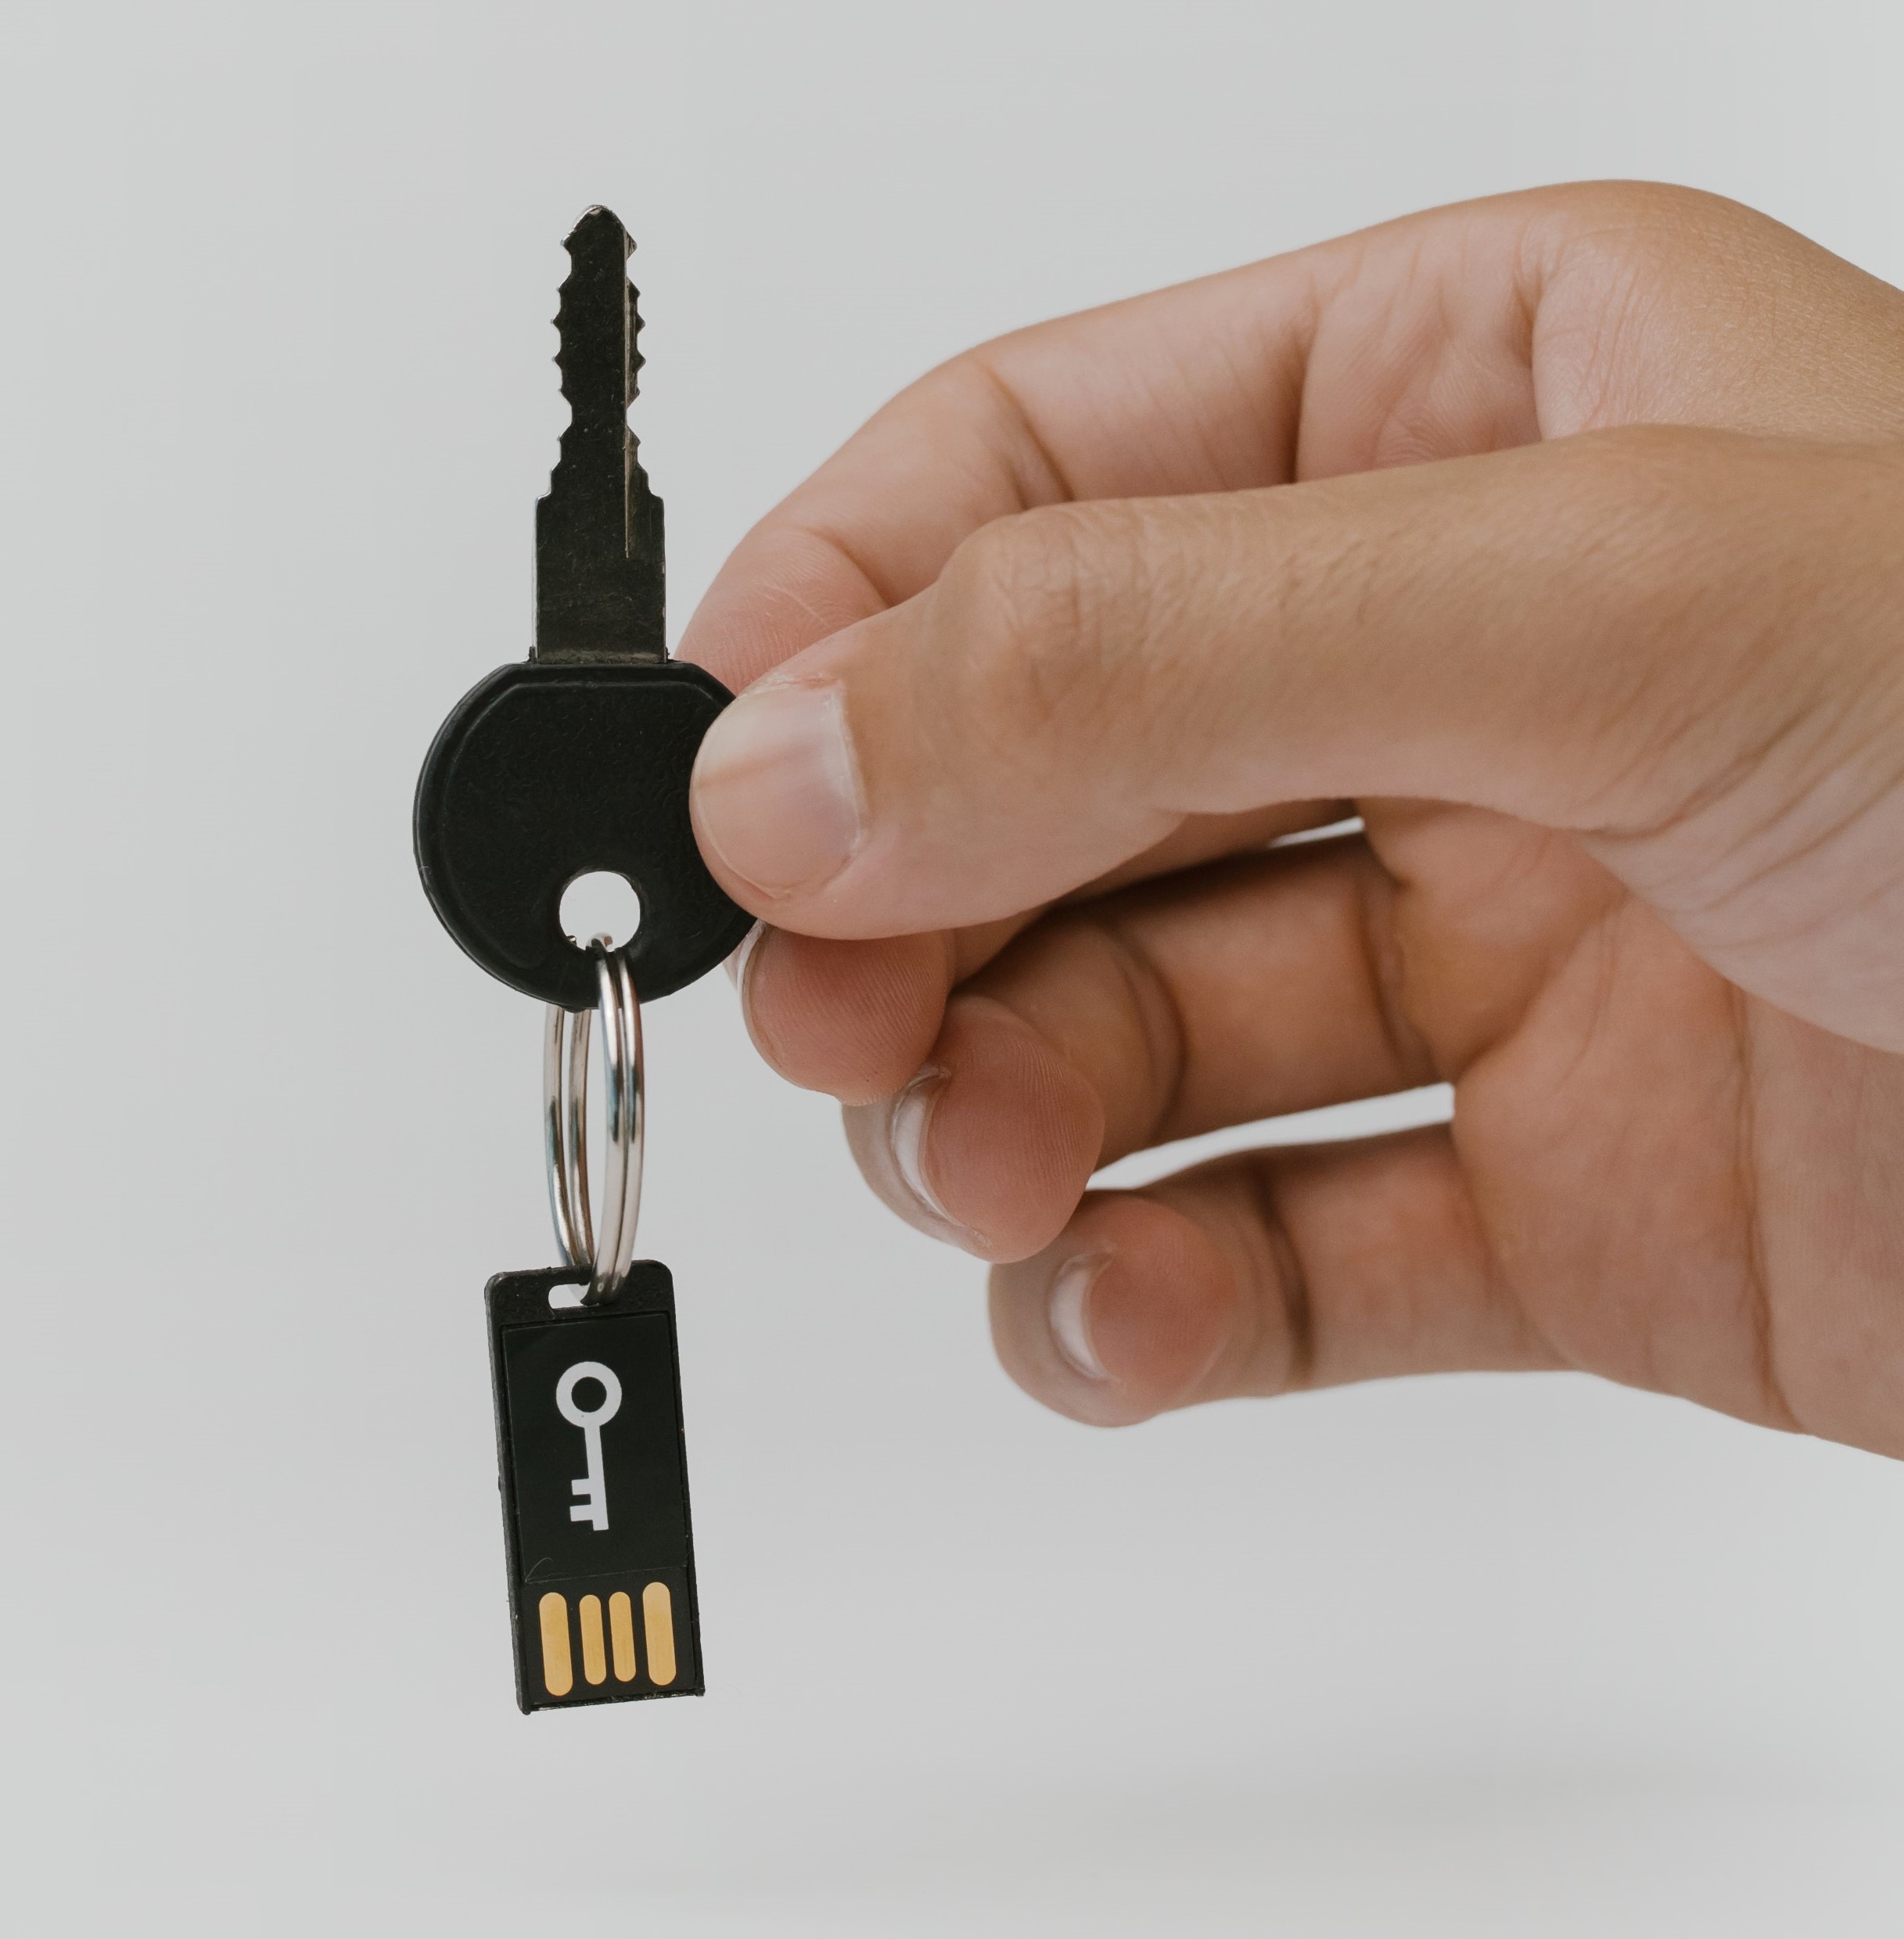 A hand holding an actual key with a key ring attached to a 2 f a device